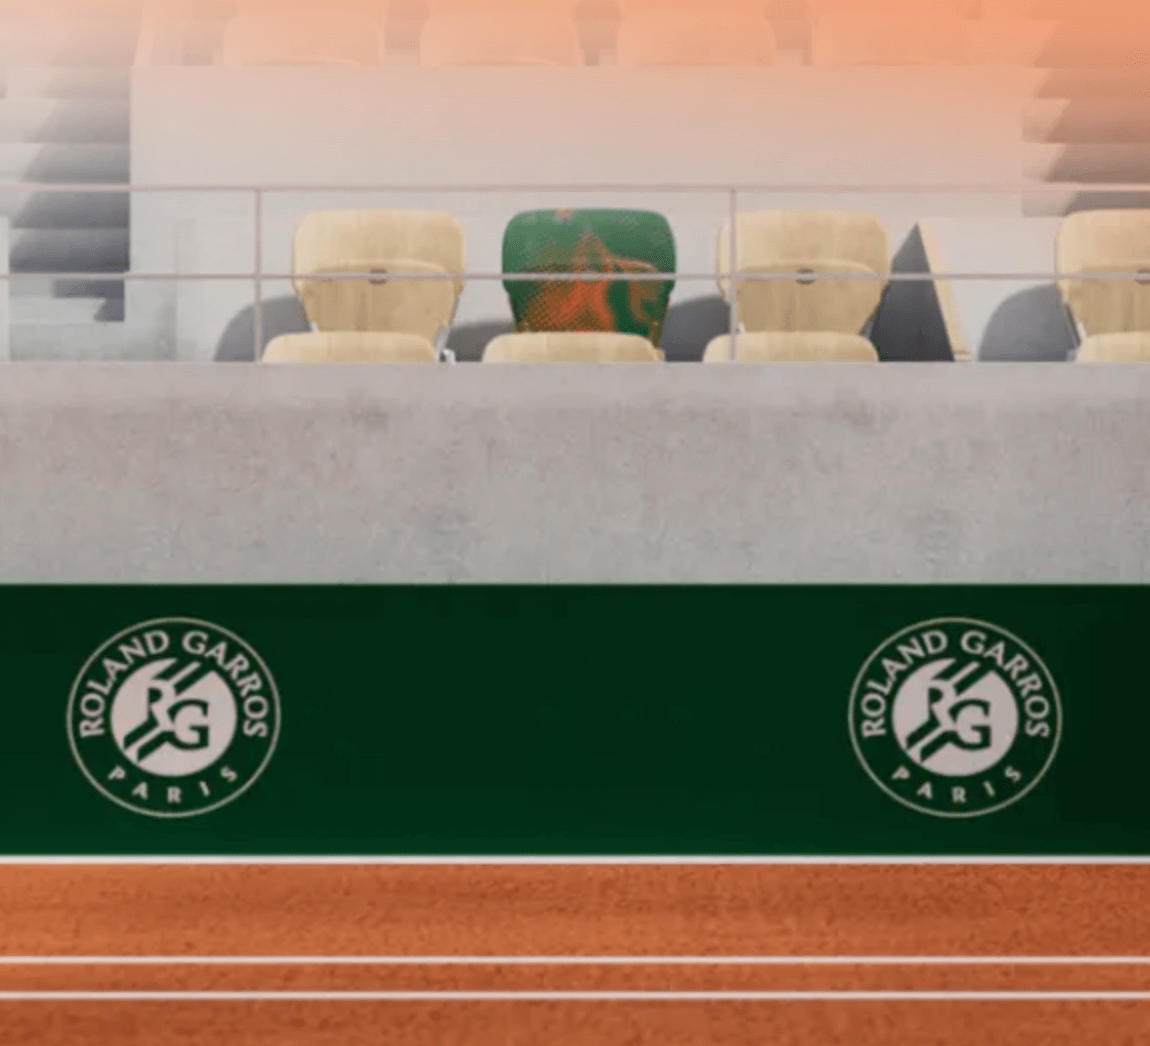 Roland Garros NFT Collection developed by Guillaume Agis